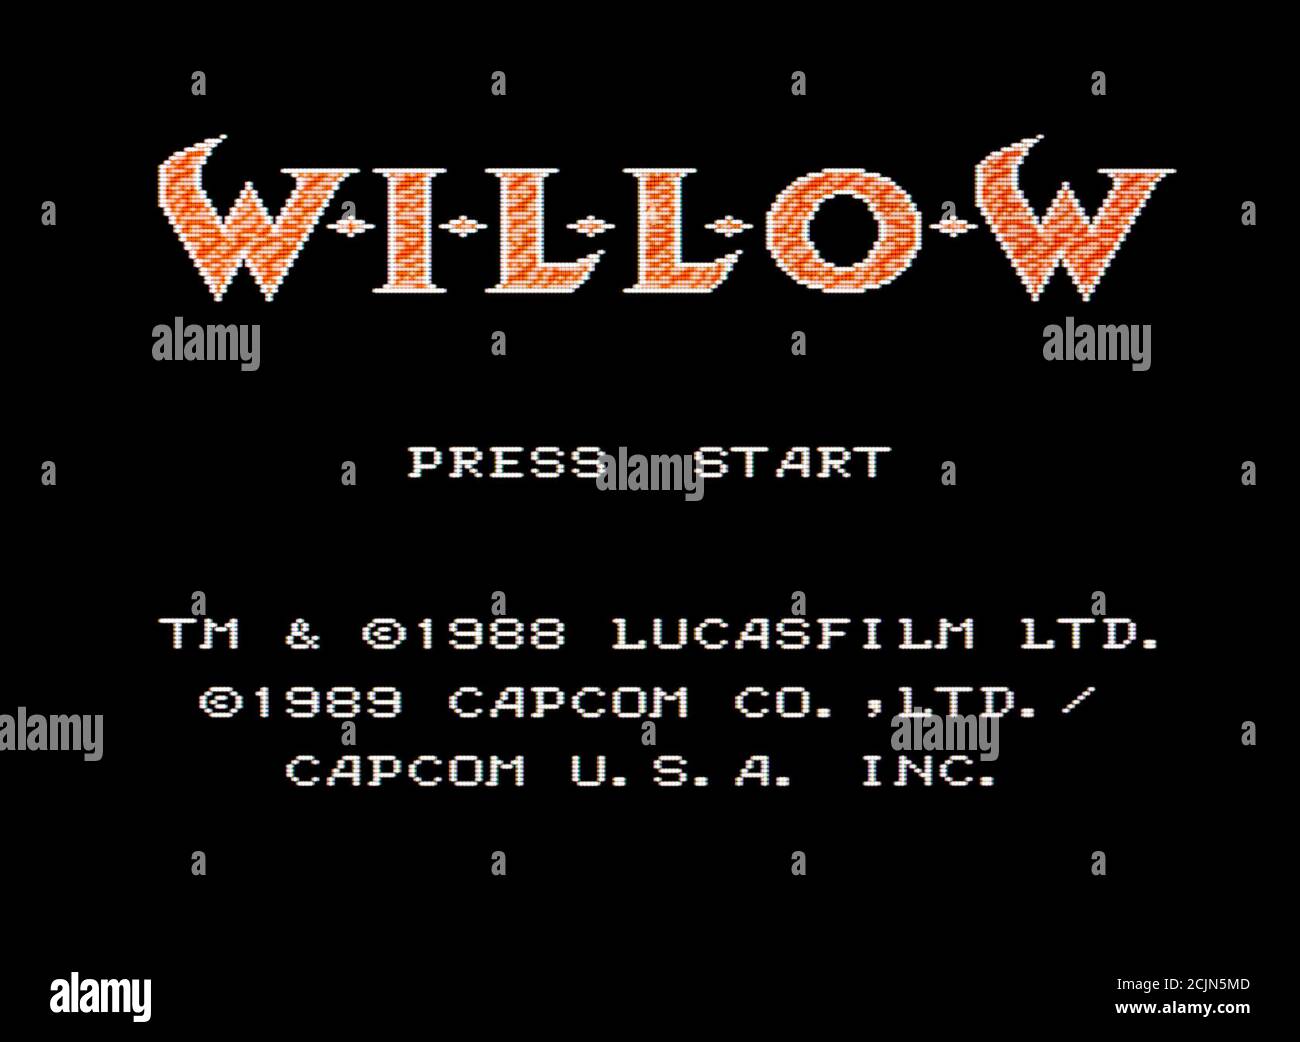 Willow - Nintendo Entertainment System - NES Videogame - Editorial use only Stock Photo